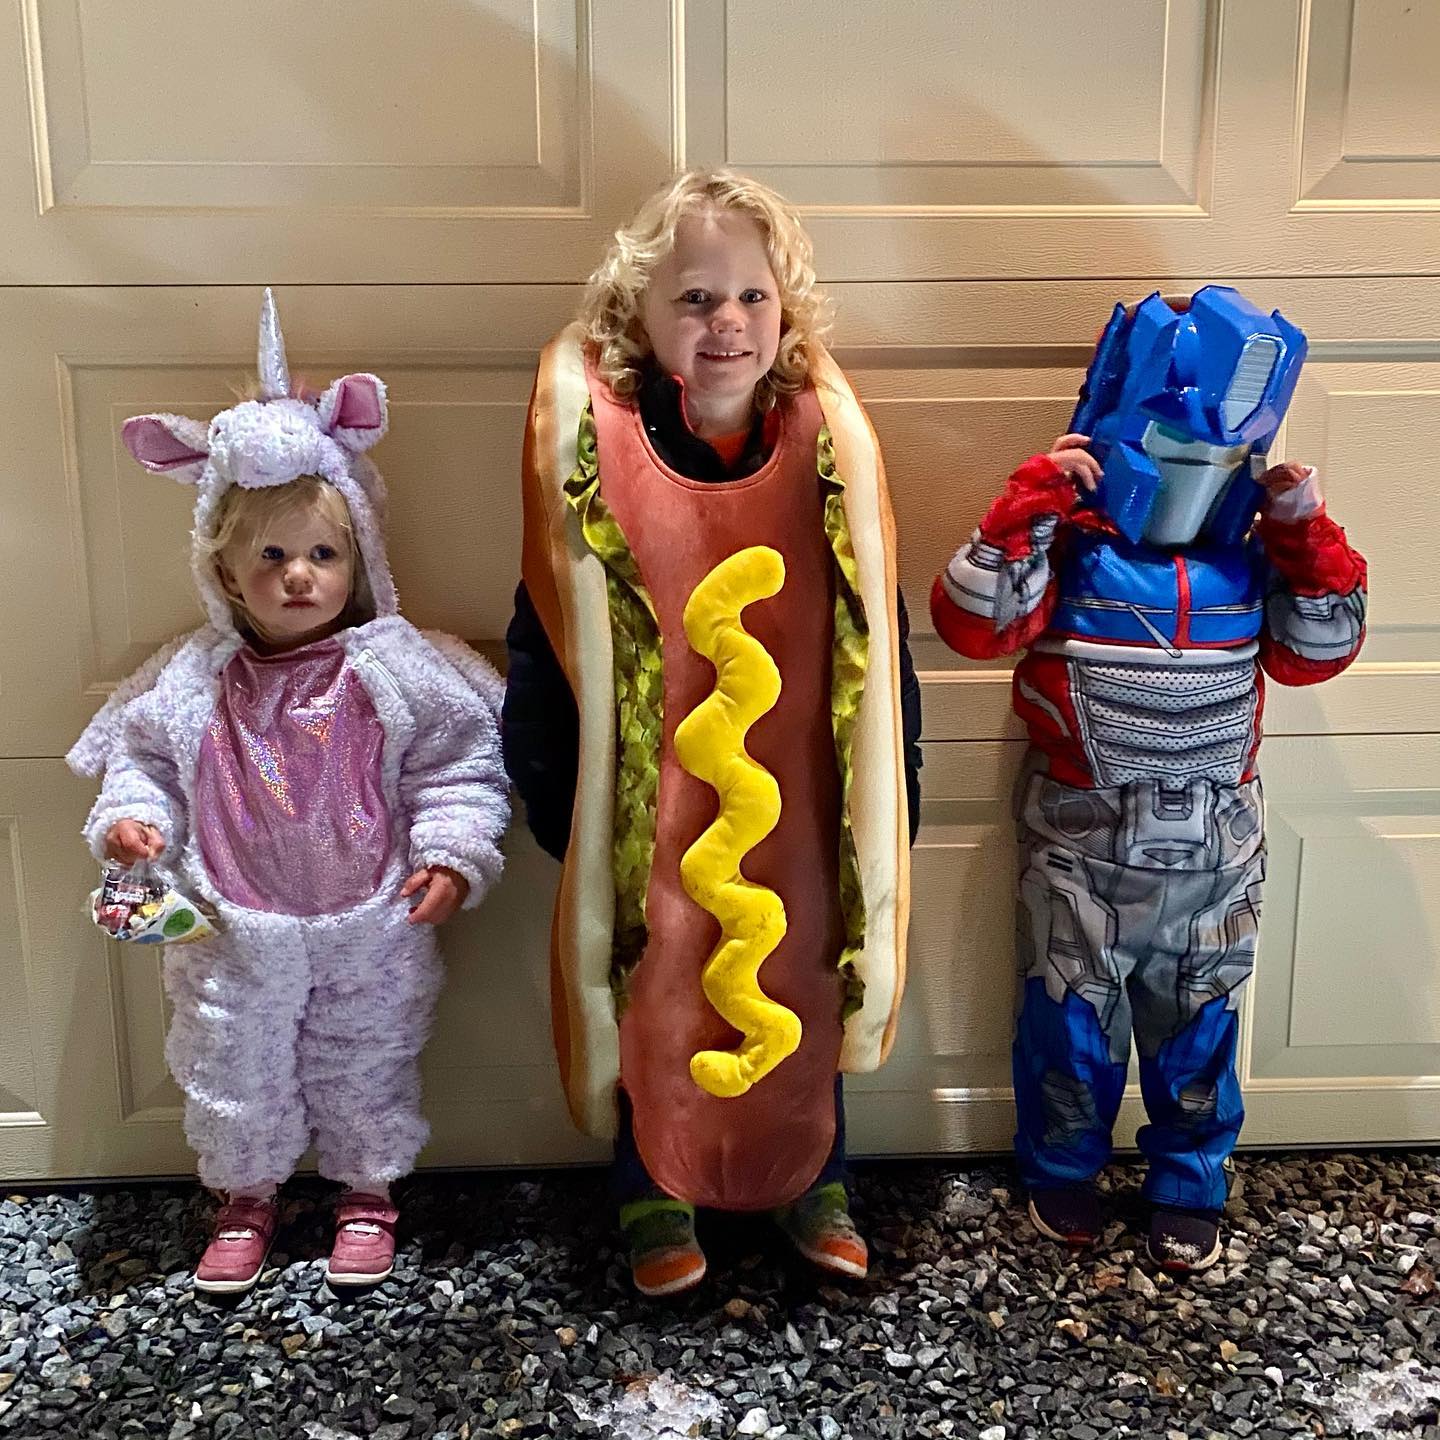 Violet, Desmond, and their sole quarantine buddy, Nolan. We had a safe and lovely Halloween while celebrating Katie’s 40th birthday.